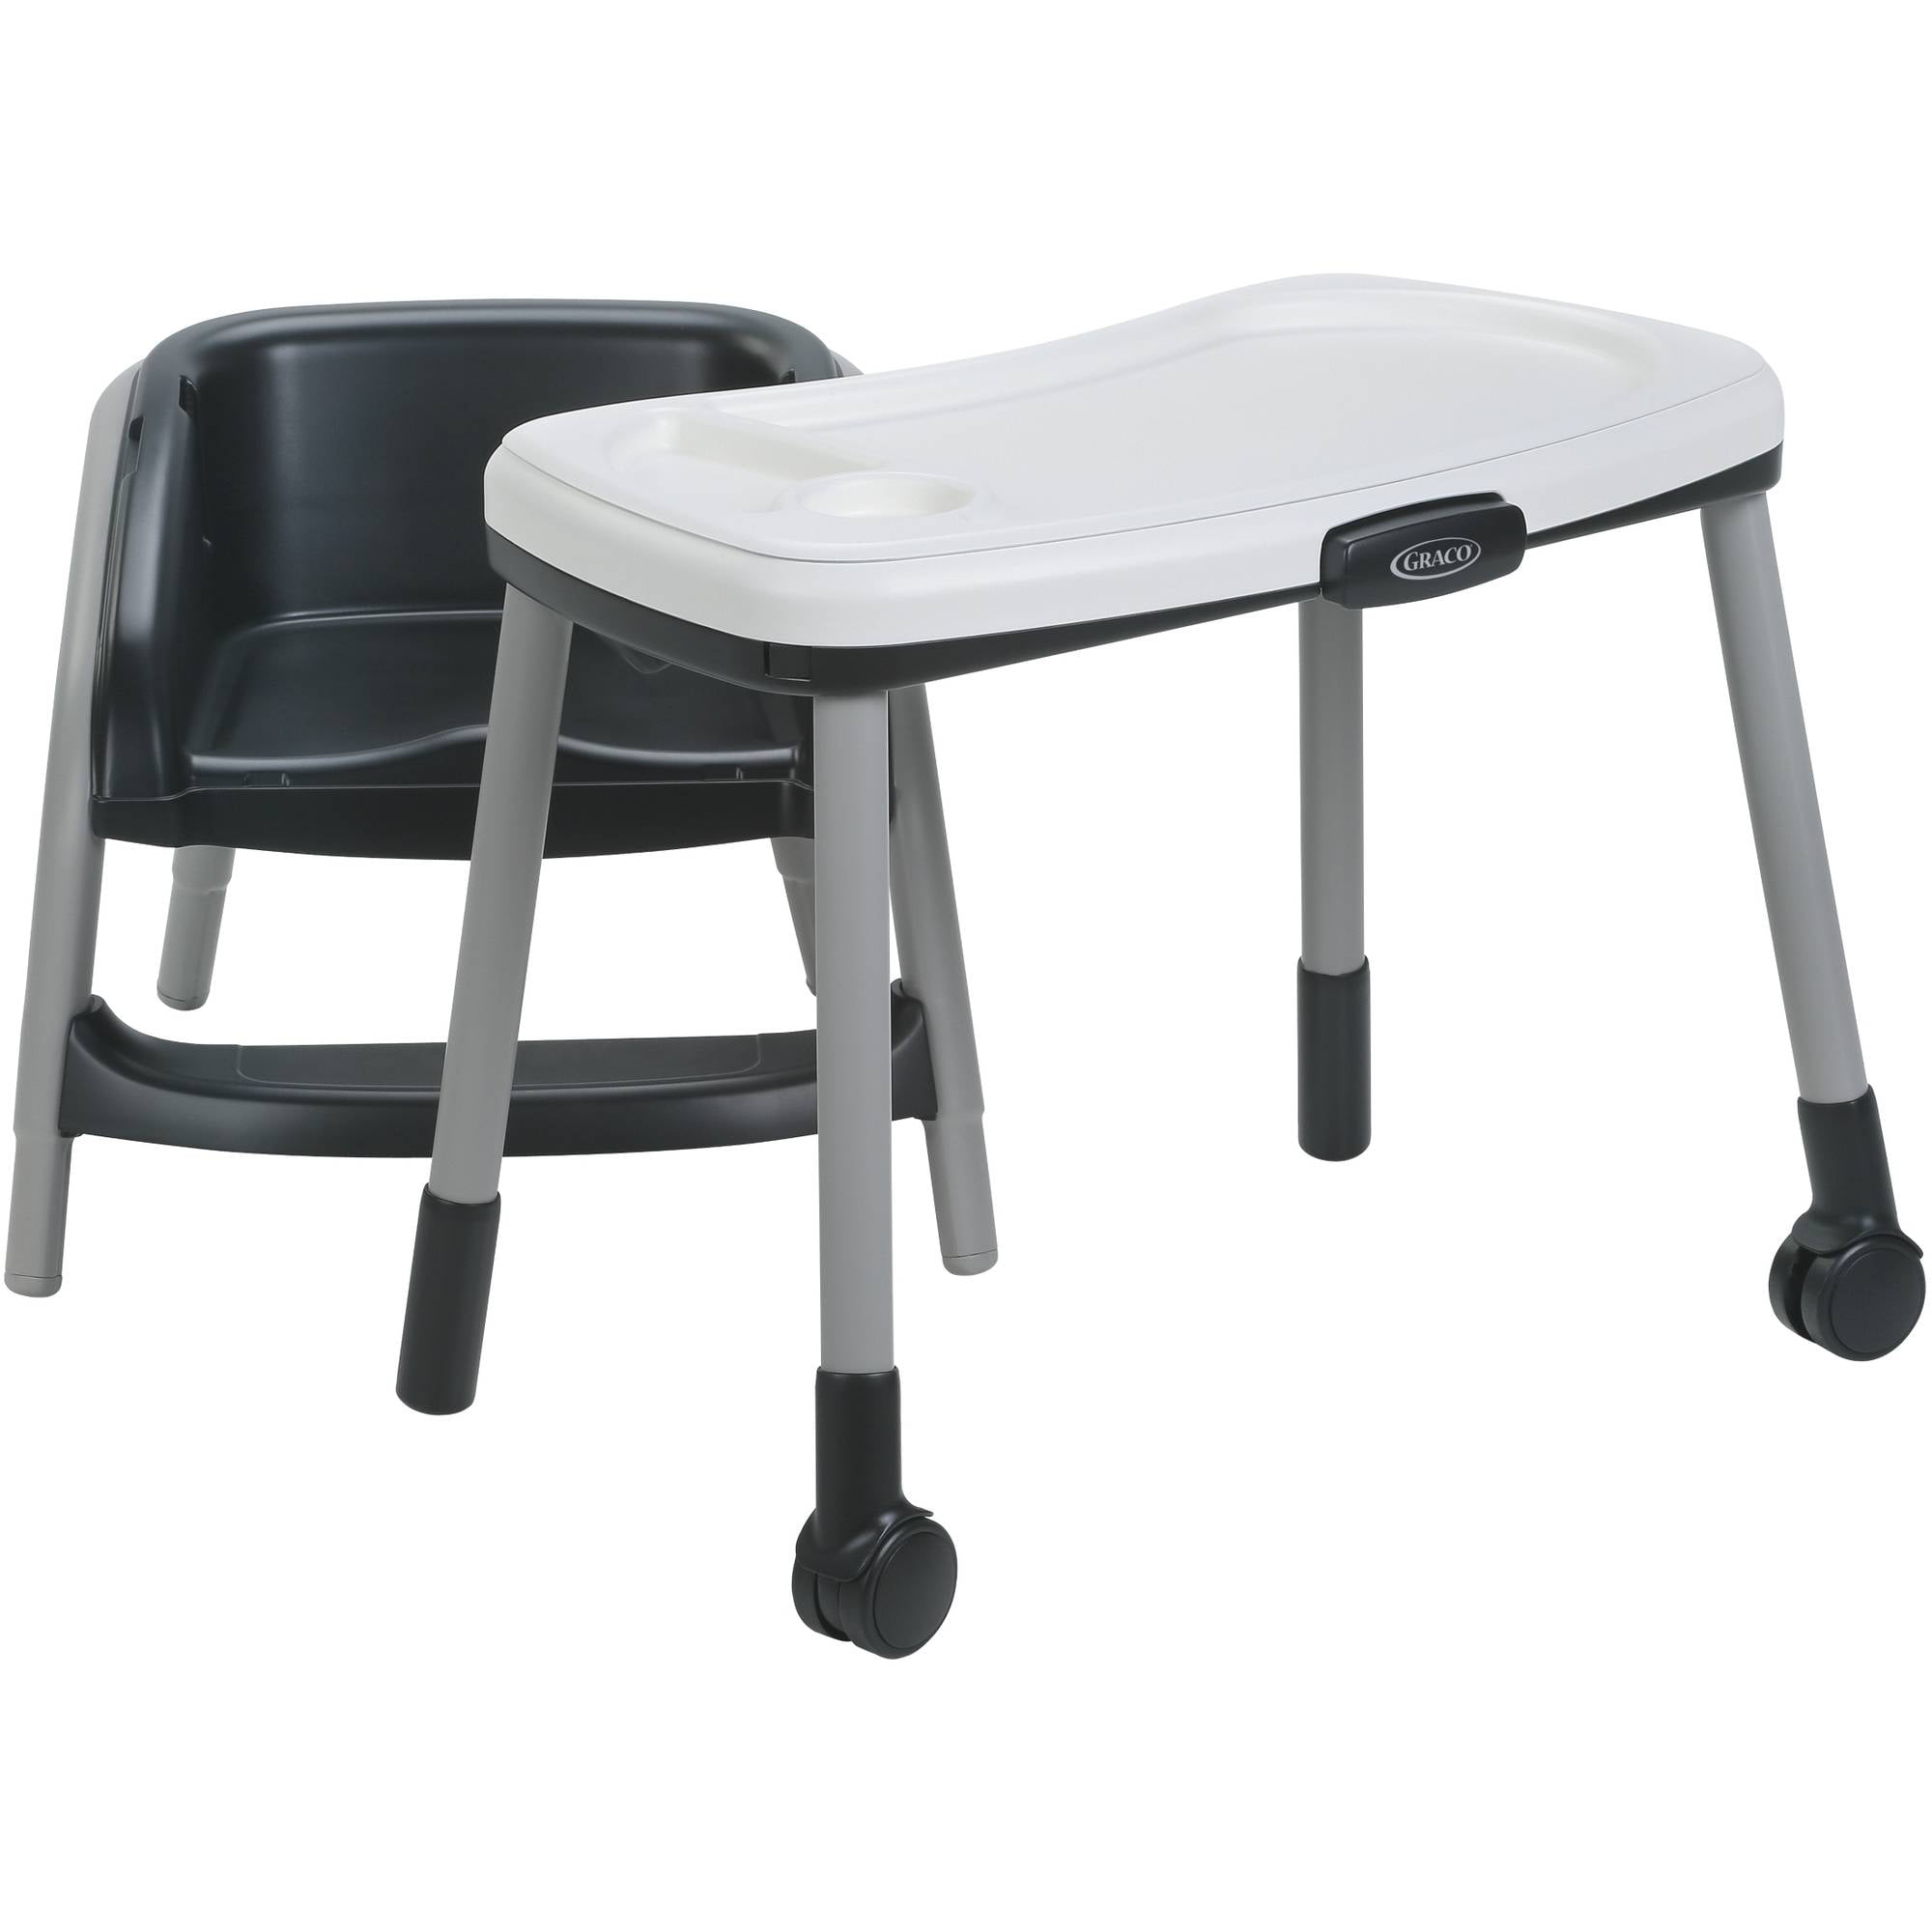 high chair converts to table